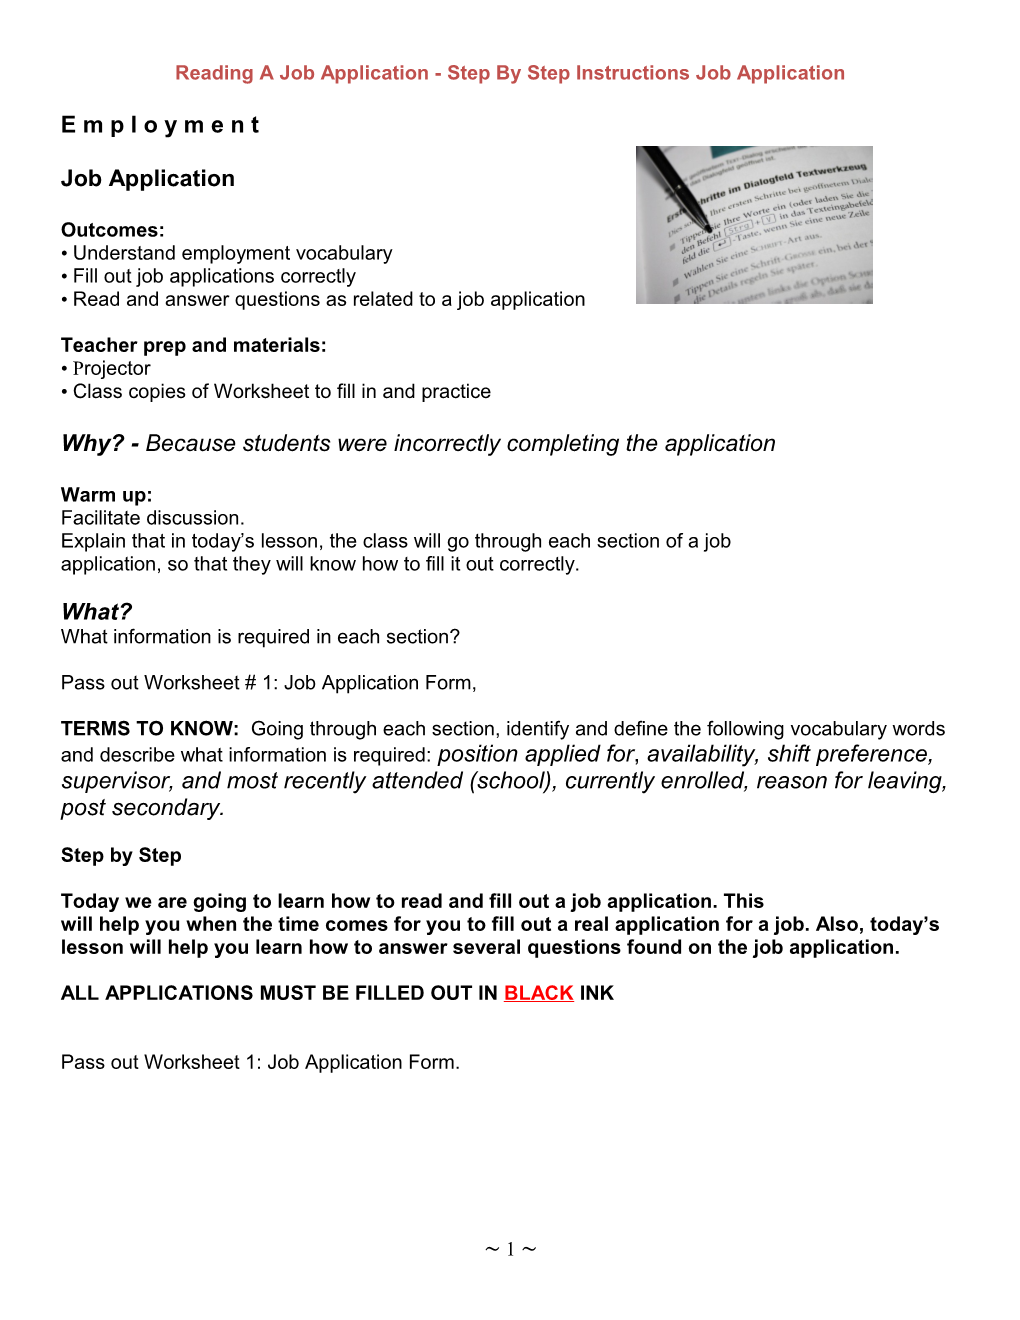 Reading a Job Application - Step by Step Instructions Job Application